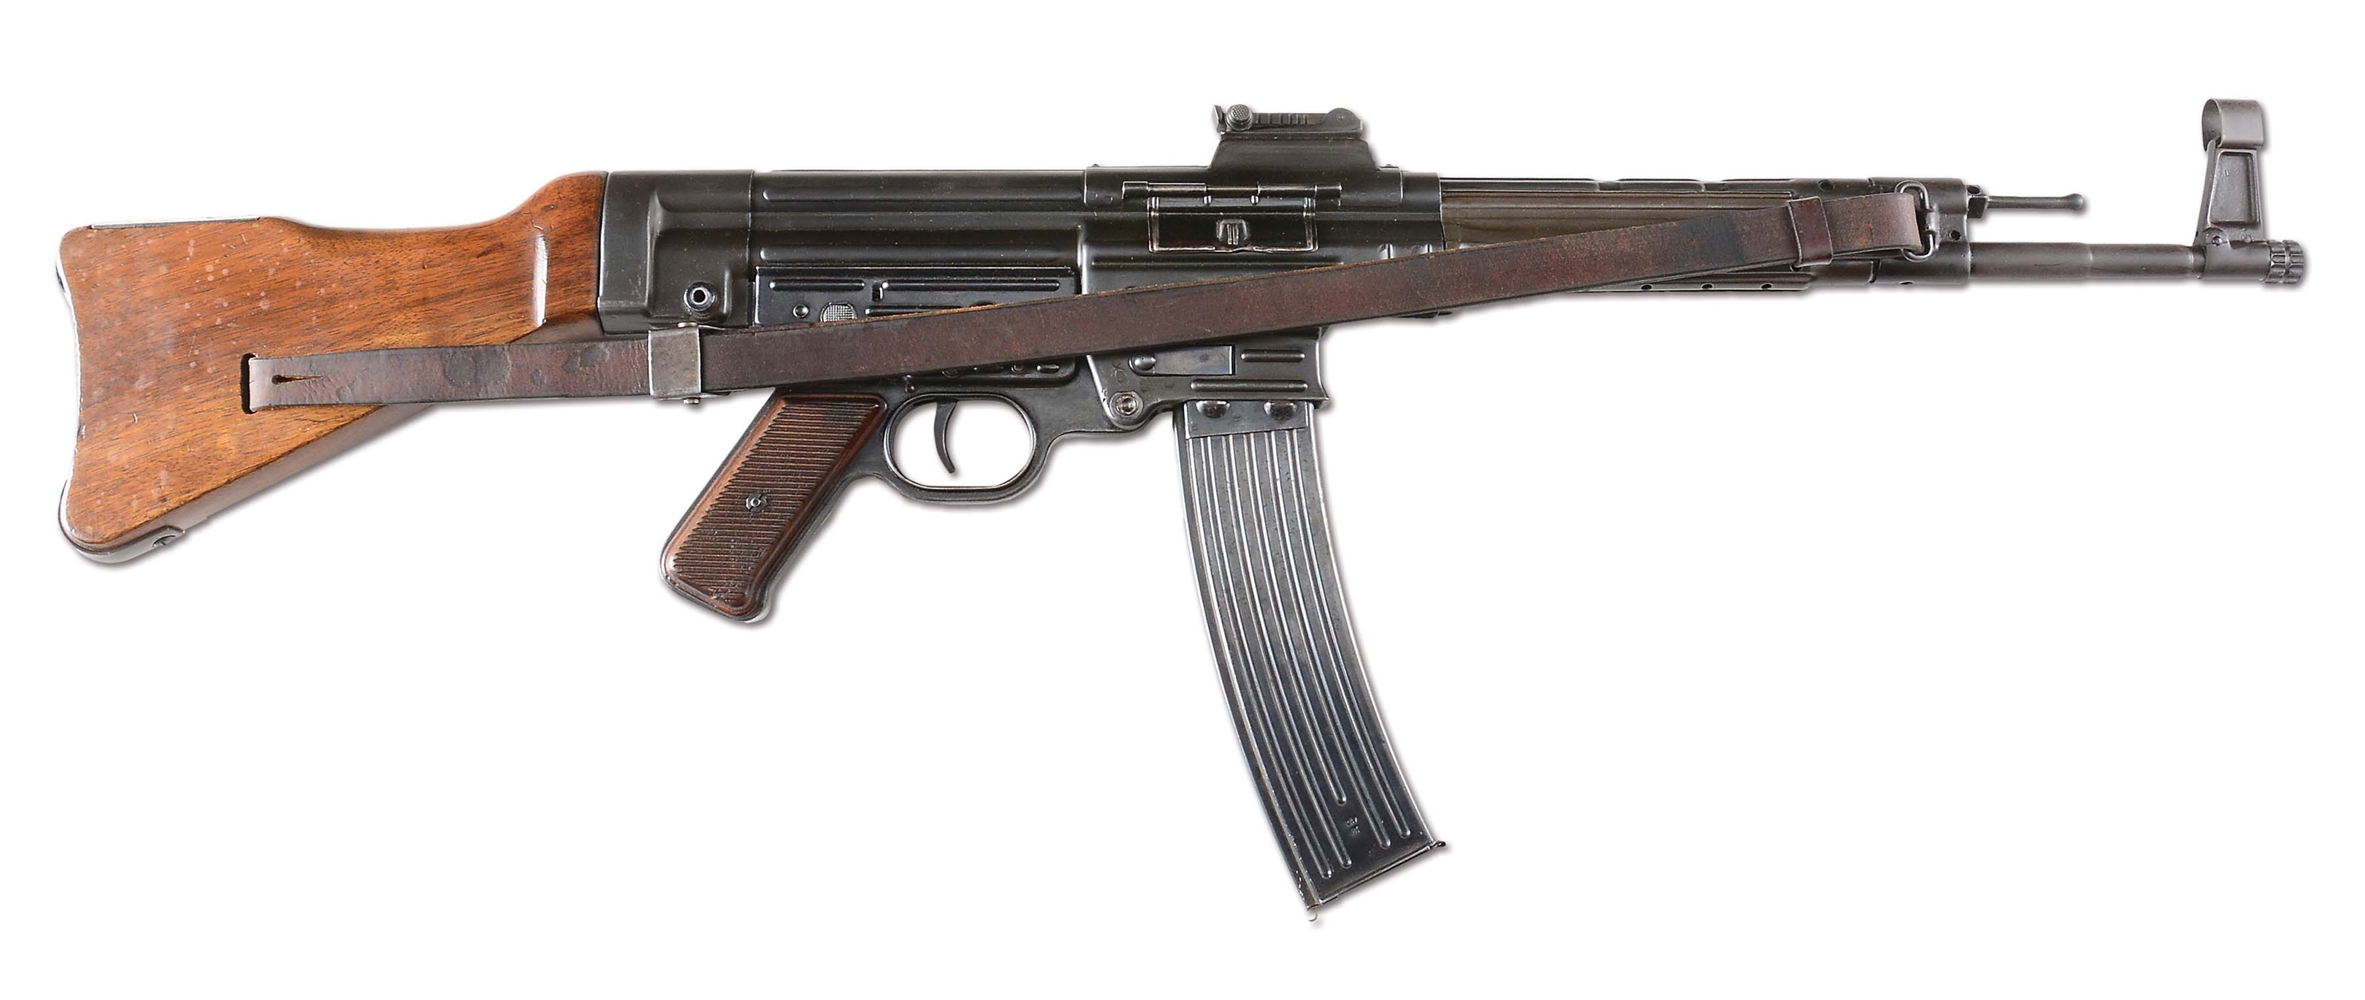 (N) EXTREMELY ATTRACTIVE GERMAN MP-44 MACHINE GUN WITH STG 44 MARKED MAGAZINE (CURIO & RELIC).